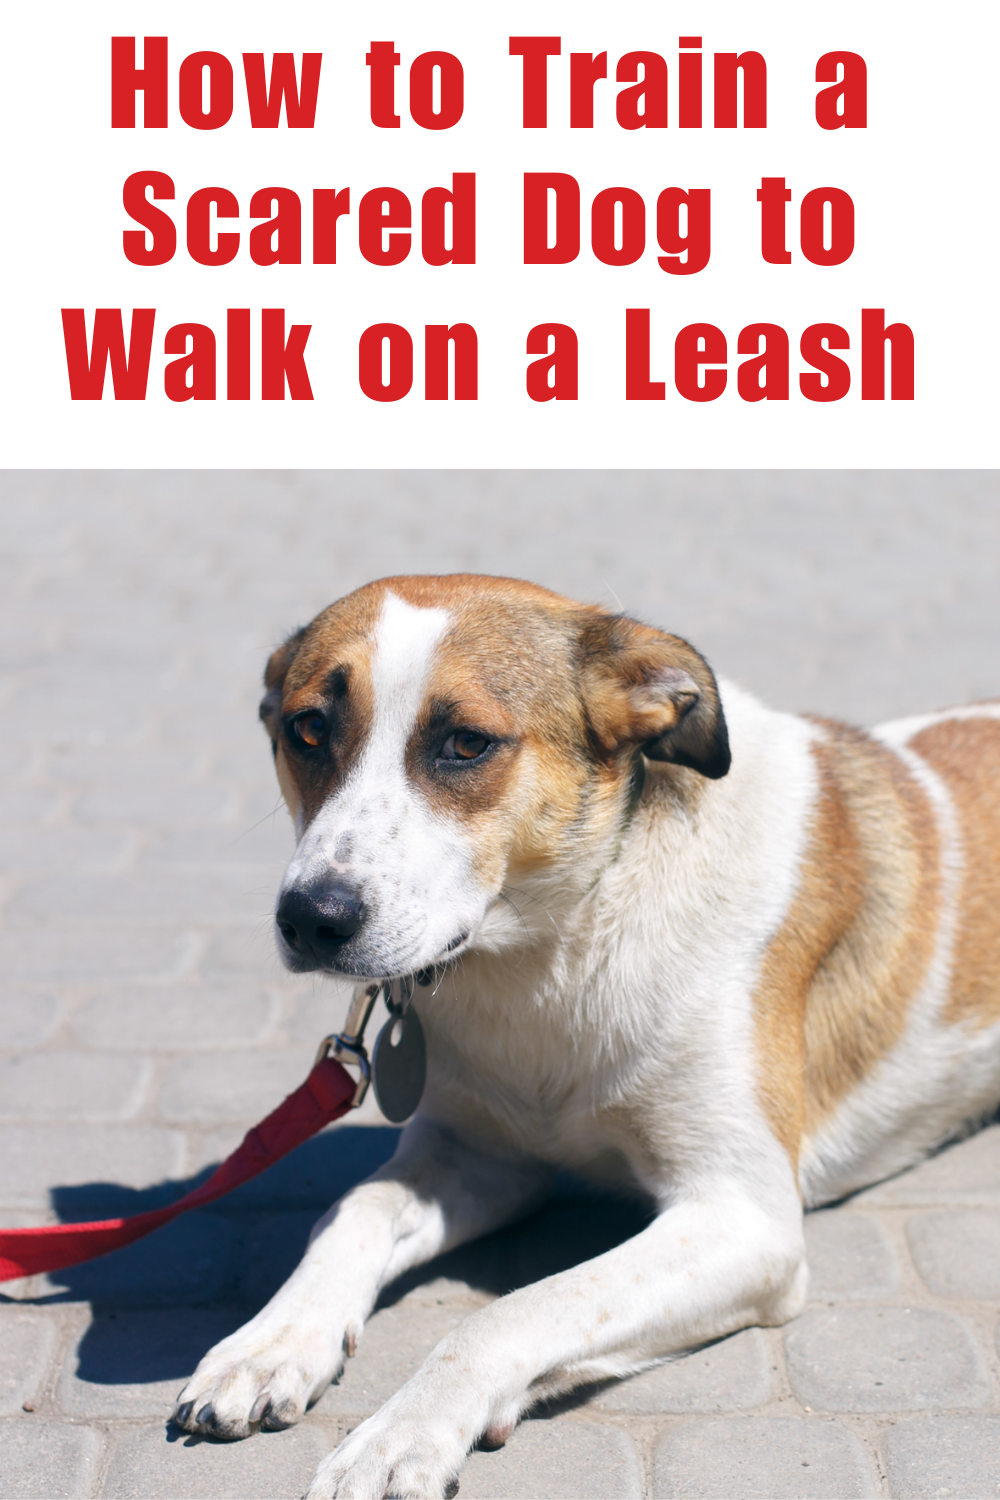 How to Train a Scared Dog to Walk on a Leash | How to Train a Dog That has Never Been on a Leash  (Early access for our Patreon community)